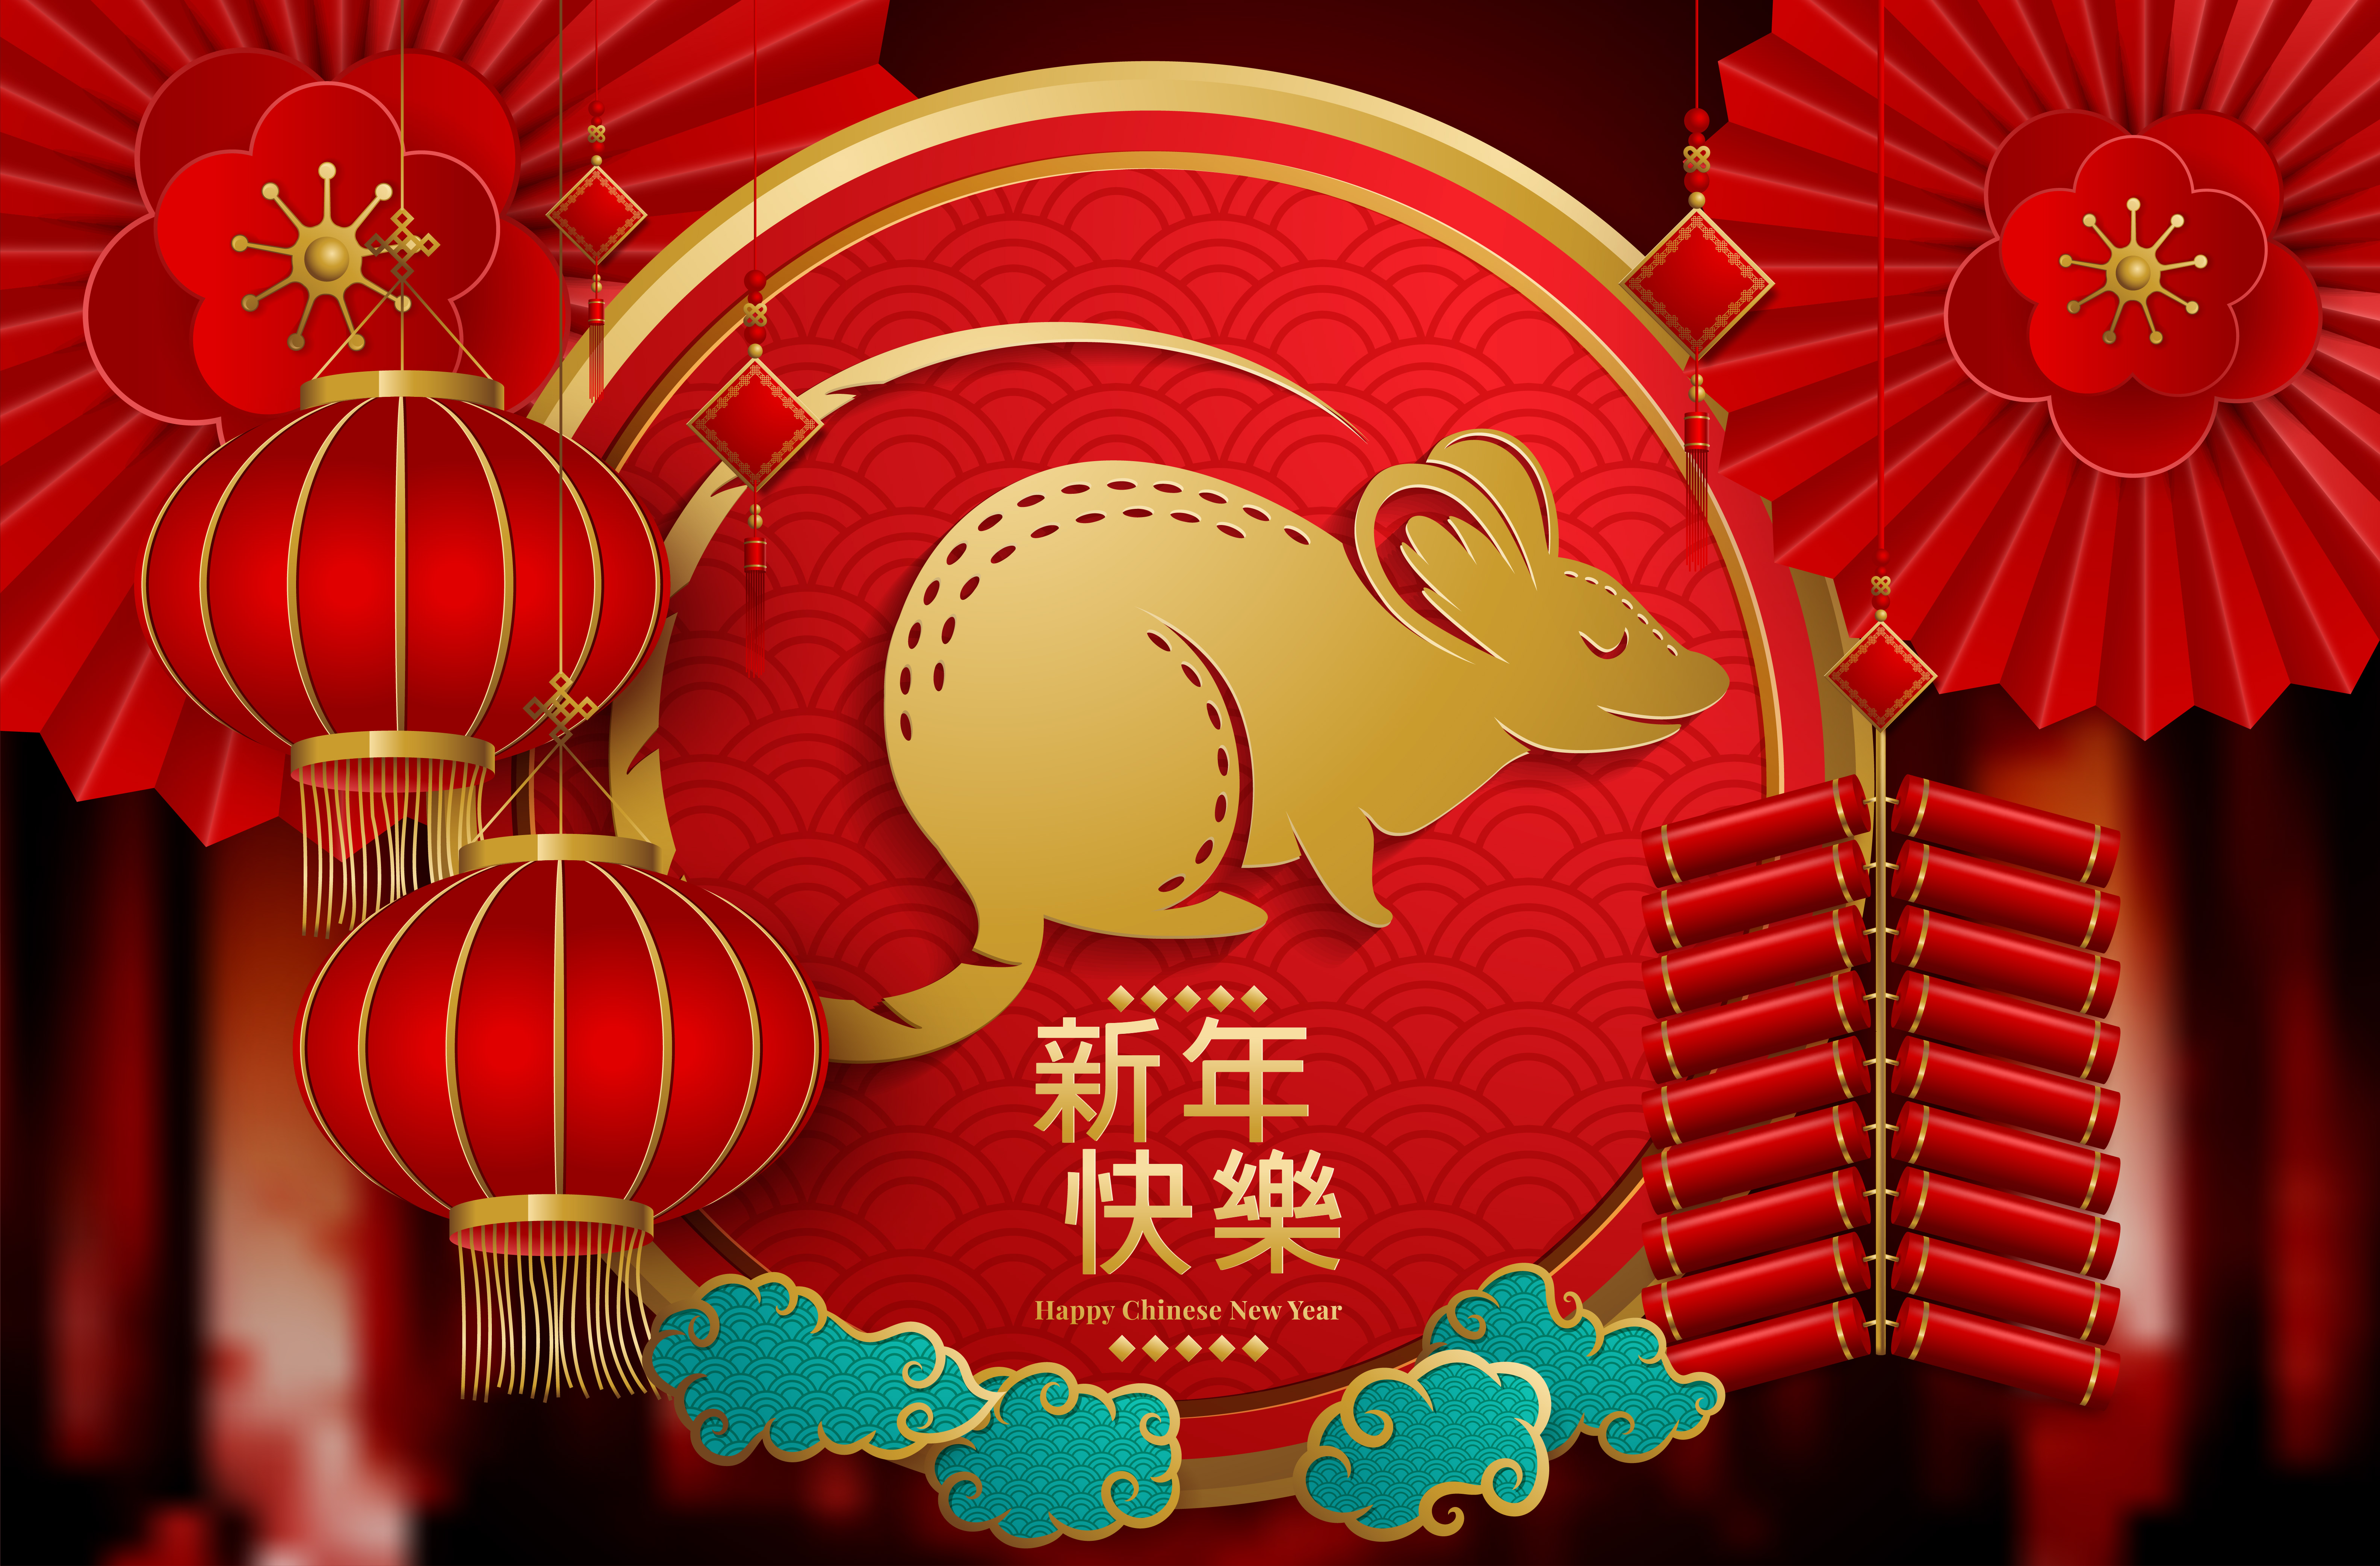 Chinese New Year 2020 traditional red and gold web banner - Download Free Vectors ...6334 x 4167